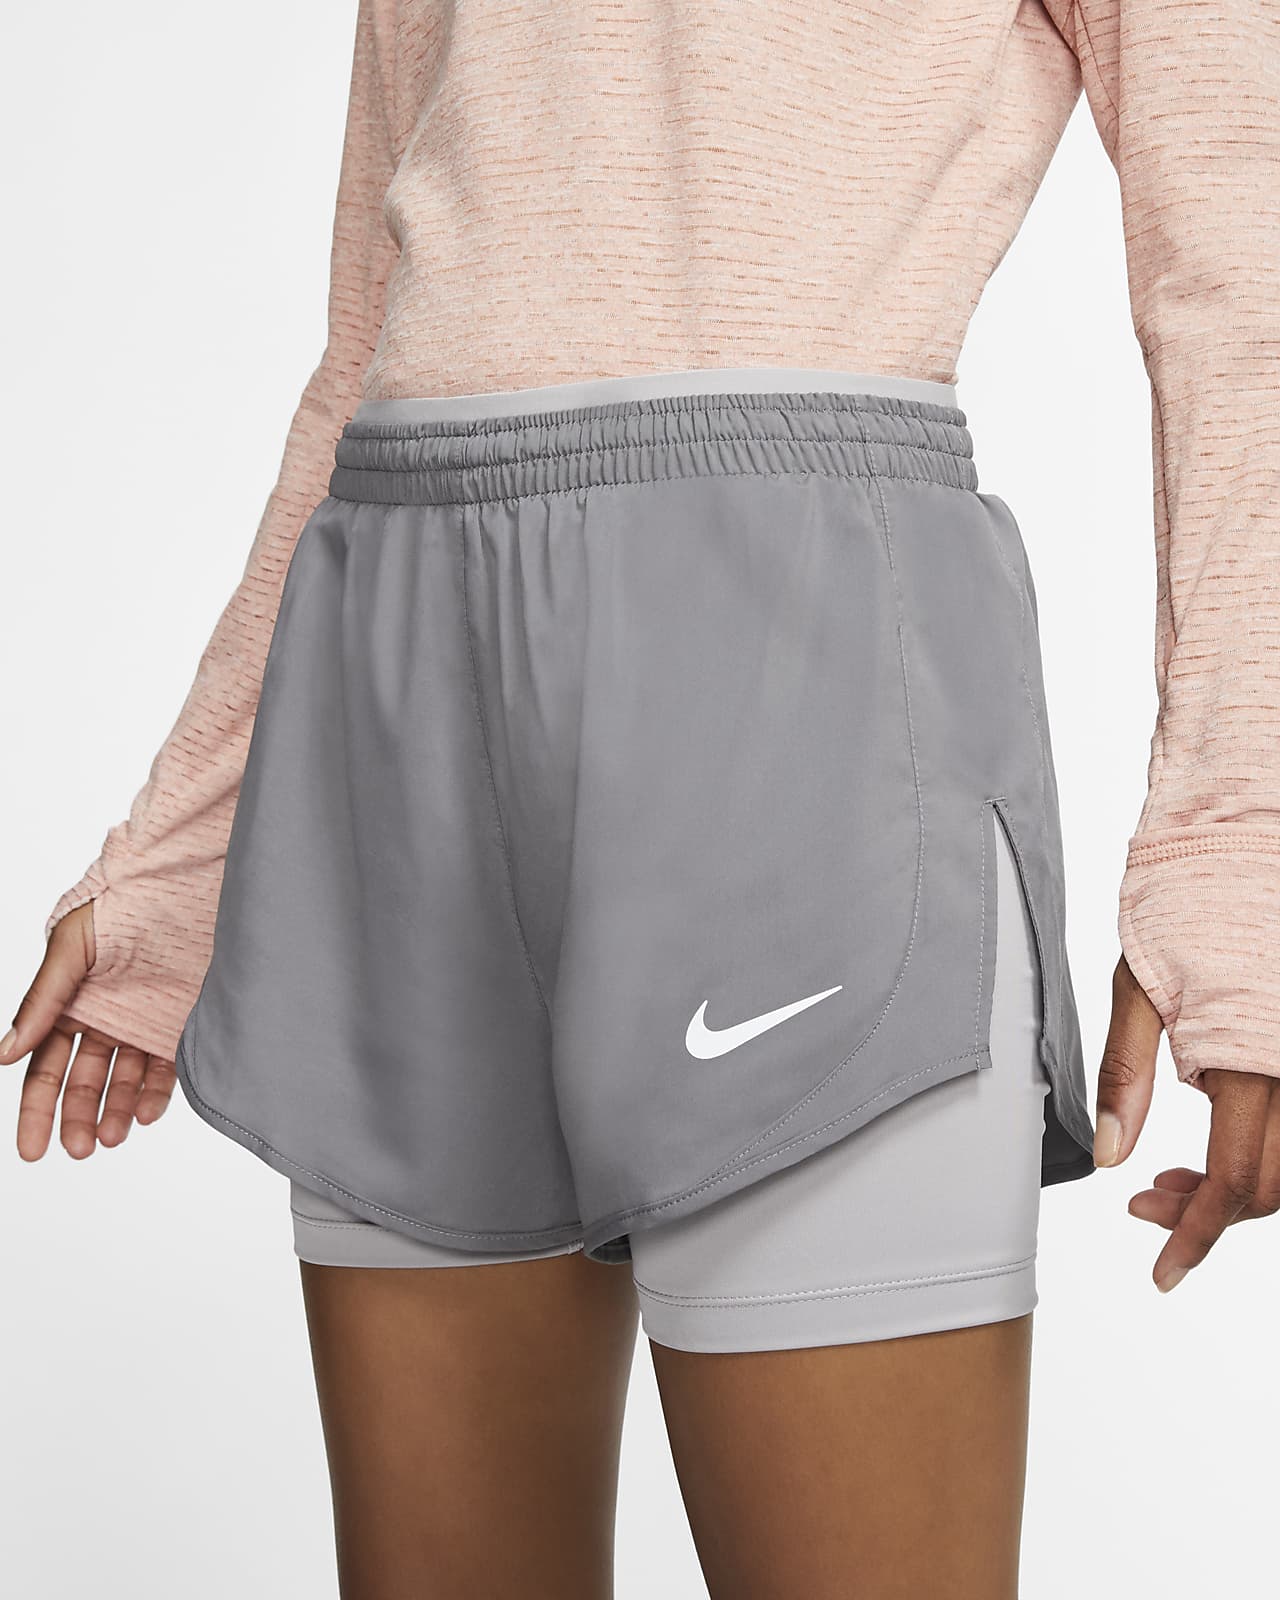 Download Nike Tempo Luxe Women's 2-in-1 Running Shorts. Nike.com